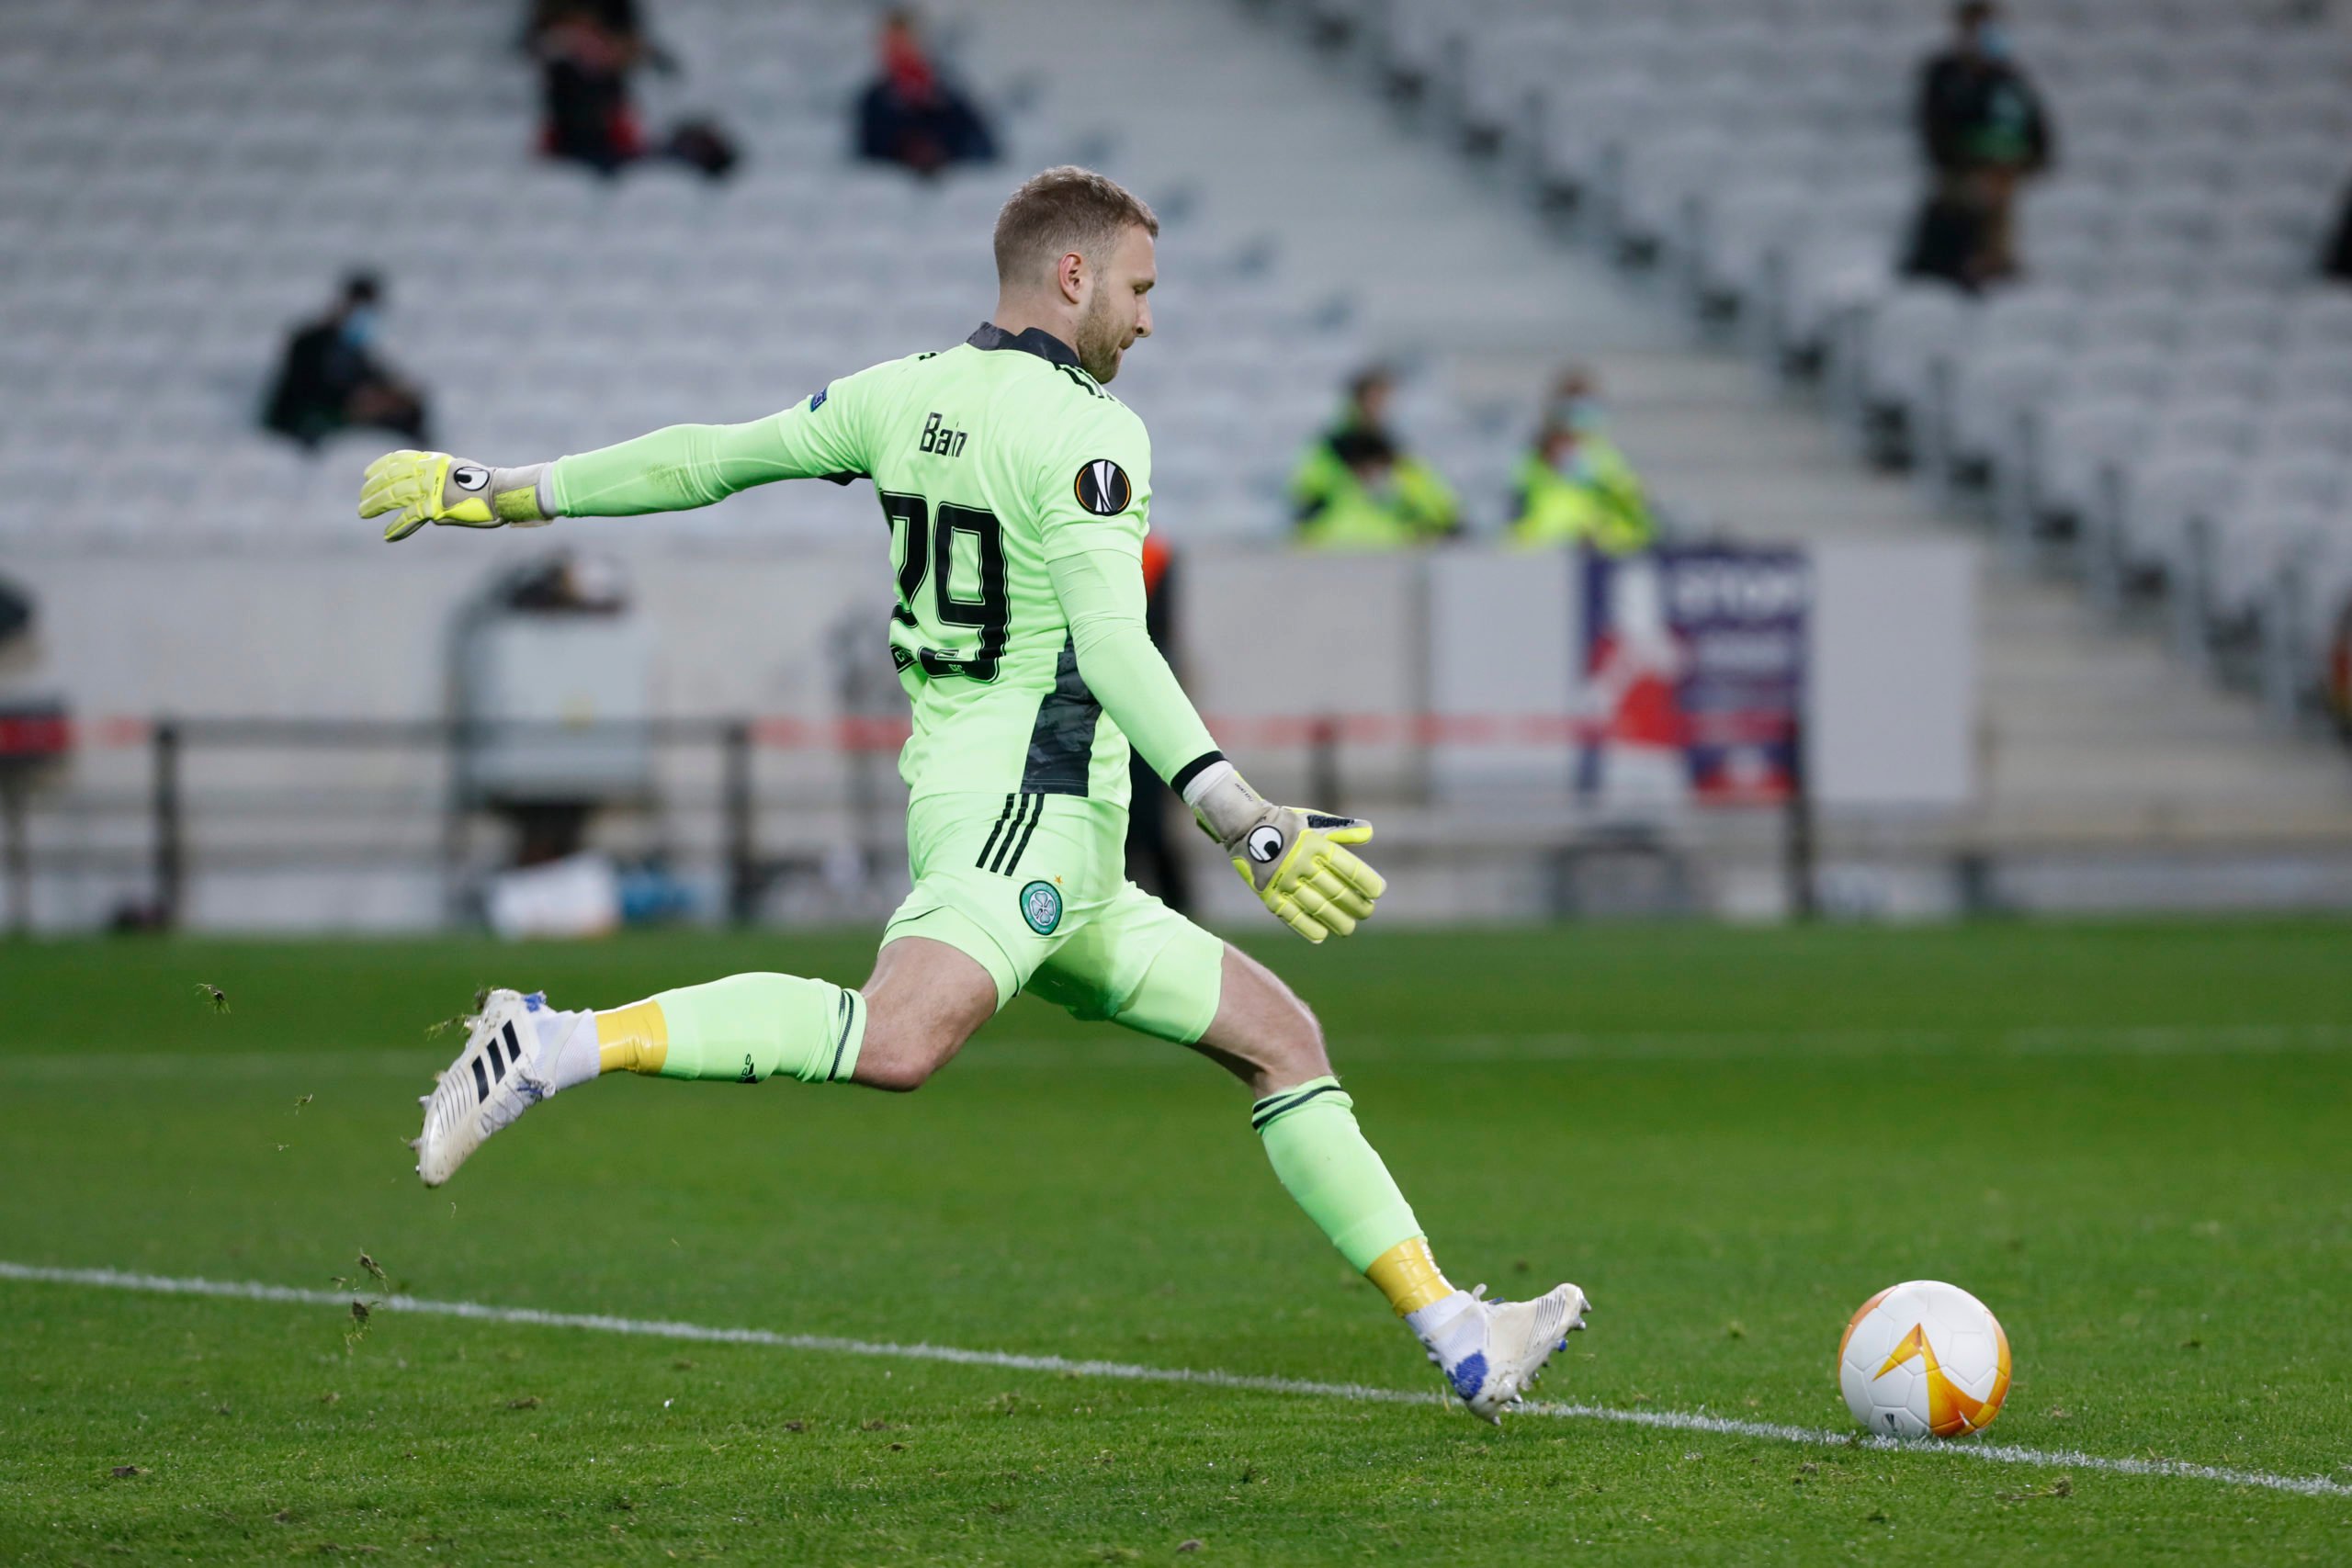 The Celtic reality that now faces Scott Bain after last night